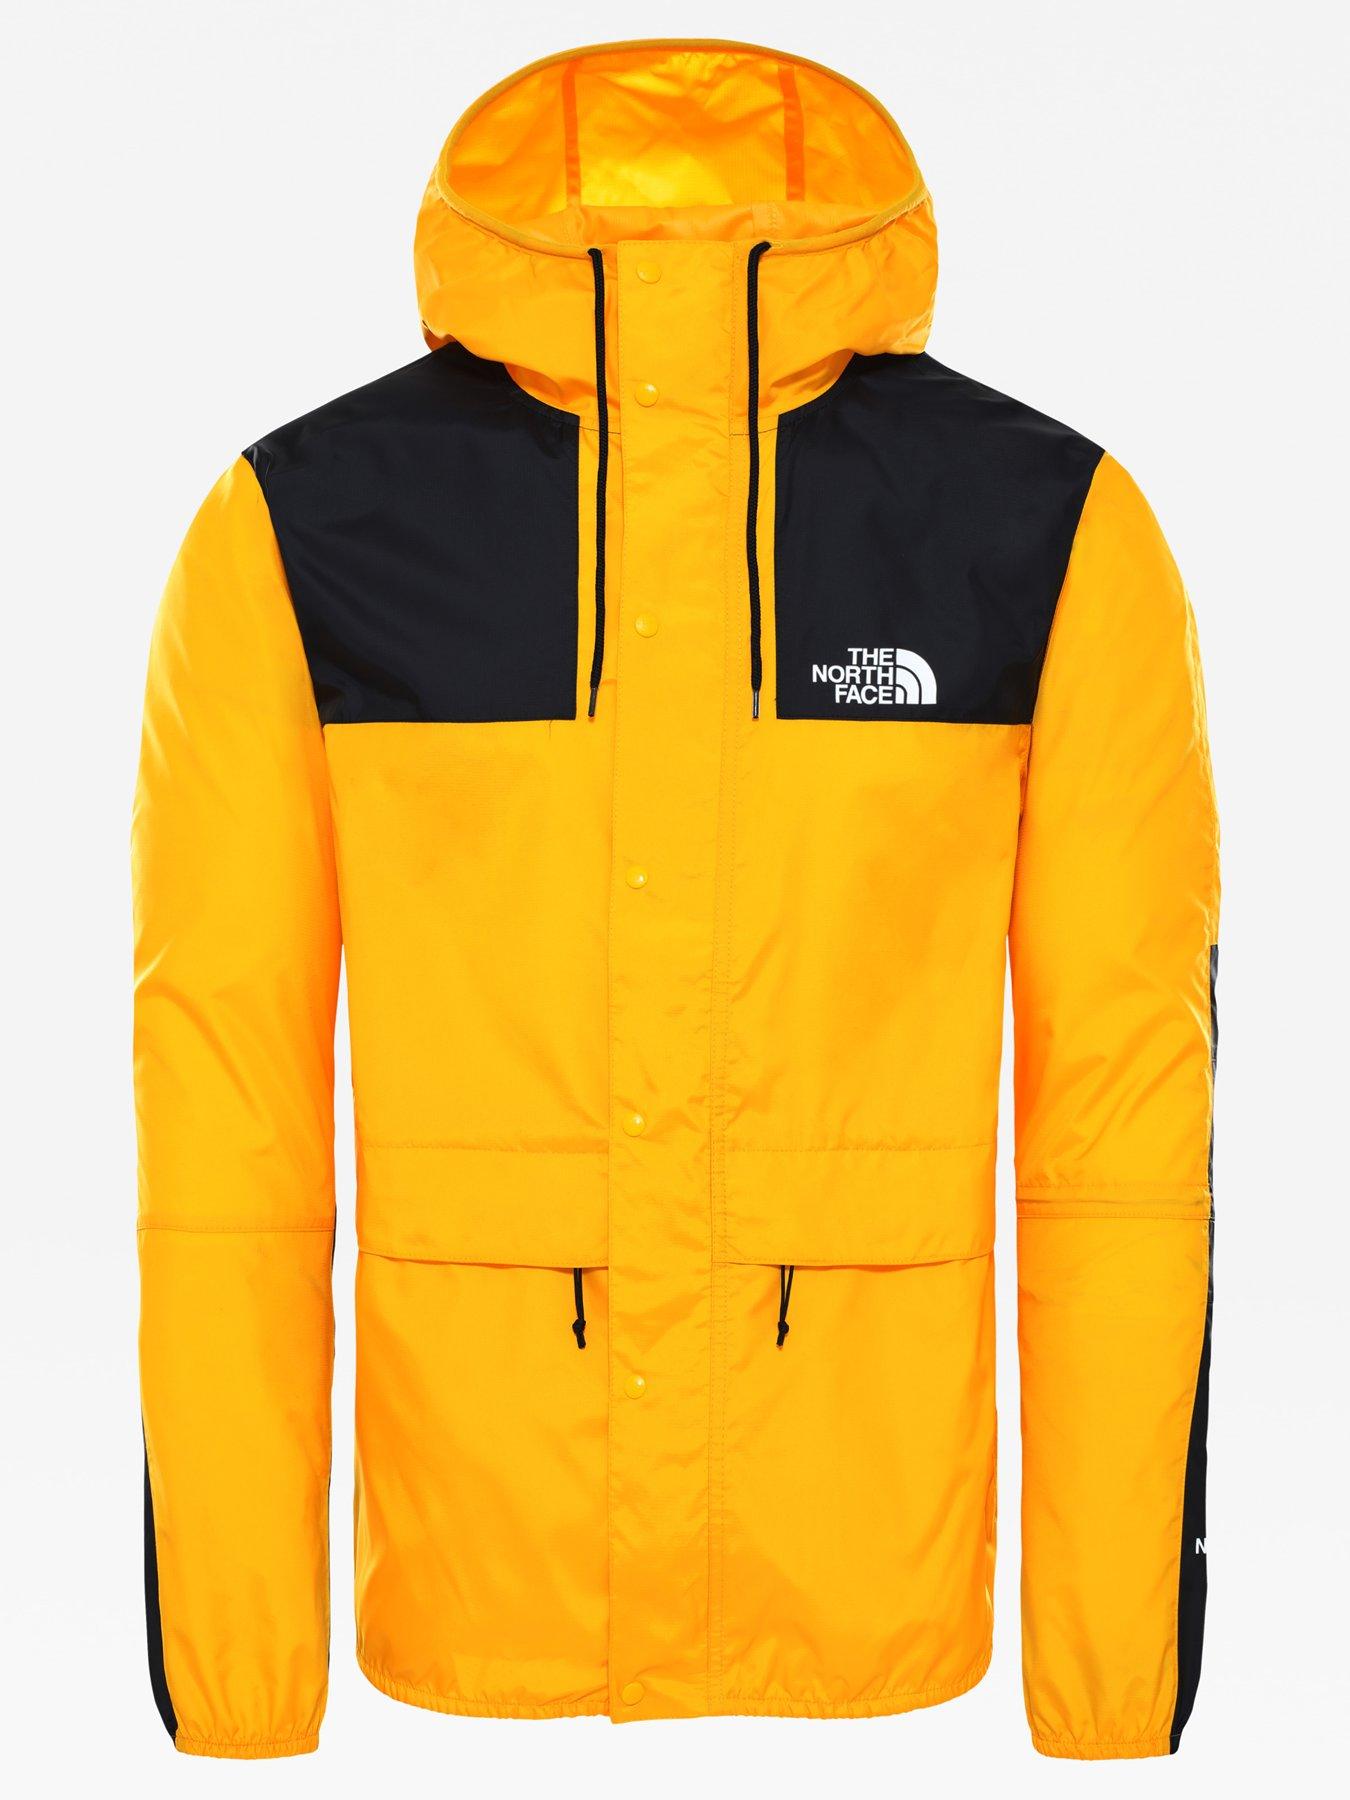 north face mountain jacket yellow 